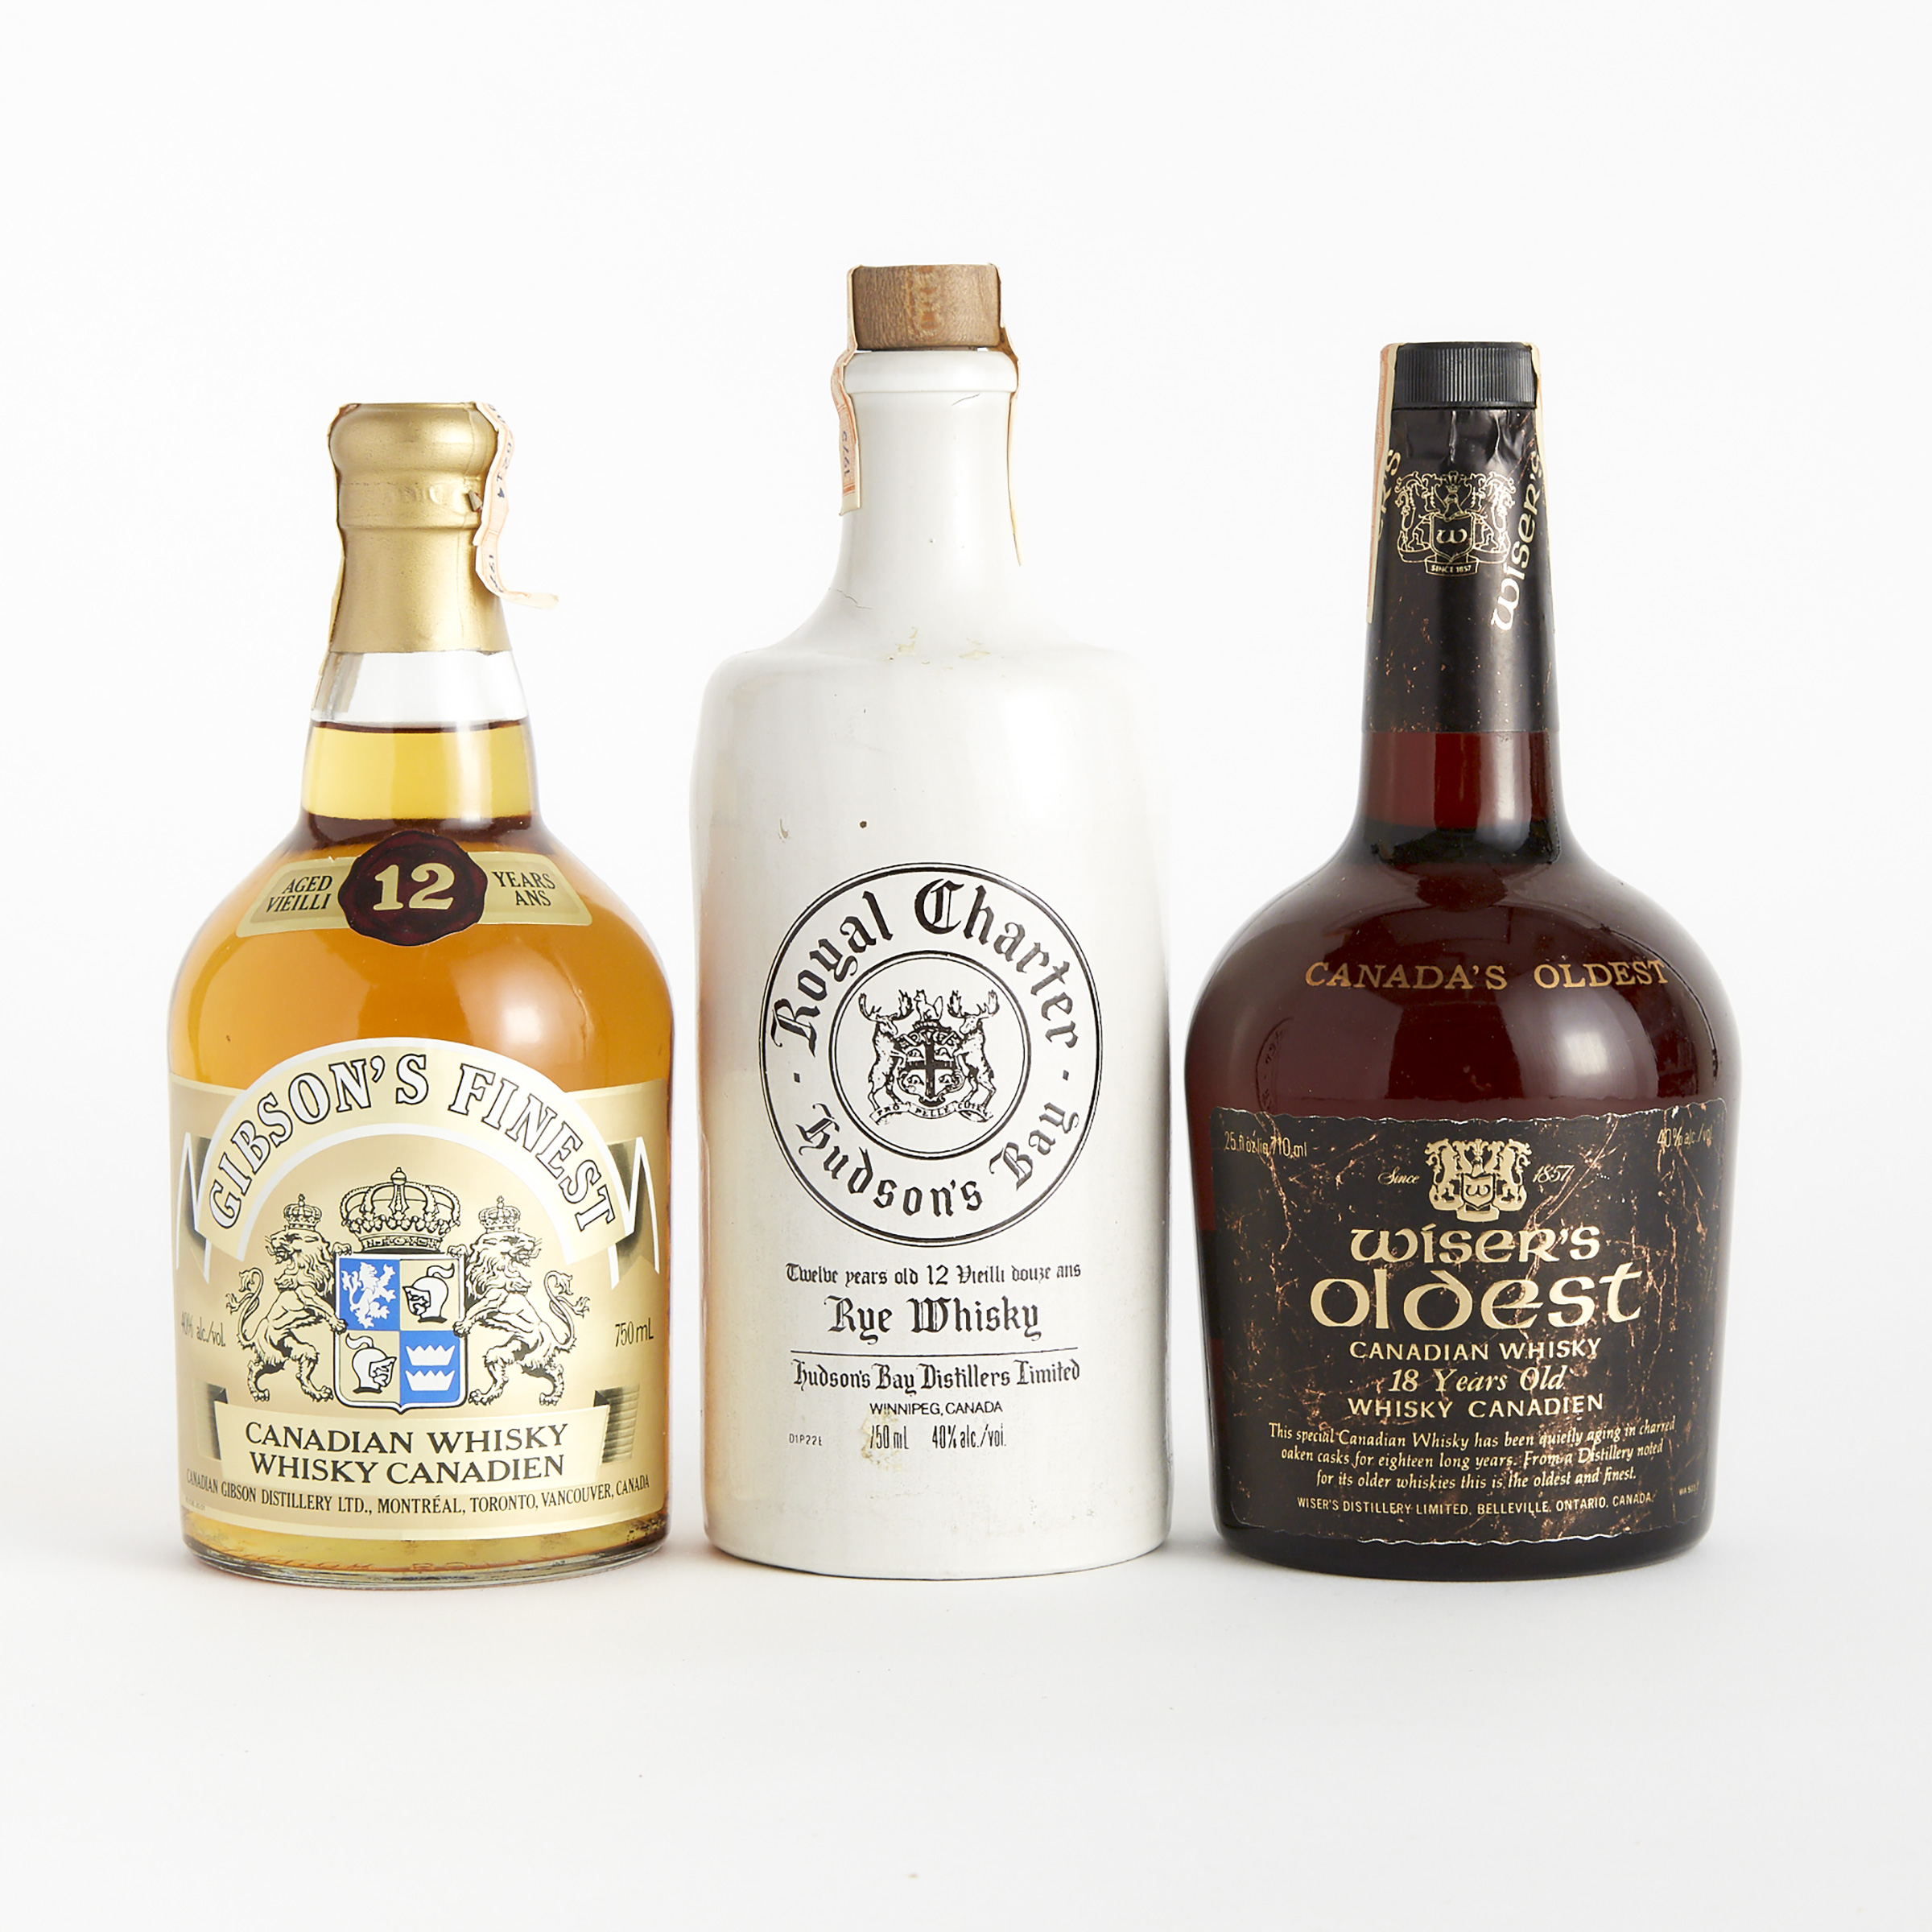 GIBSON'S FINEST CANADIAN WHISKY 12 YEARS (ONE 750 ML)
ROYAL CHARTER HUDSON'S BAY RYE WHISKY 12 YEARS (ONE 750 ML)
WISER'S OLDEST CANADIAN WHISKY 18 YEARS (ONE 710 ML)